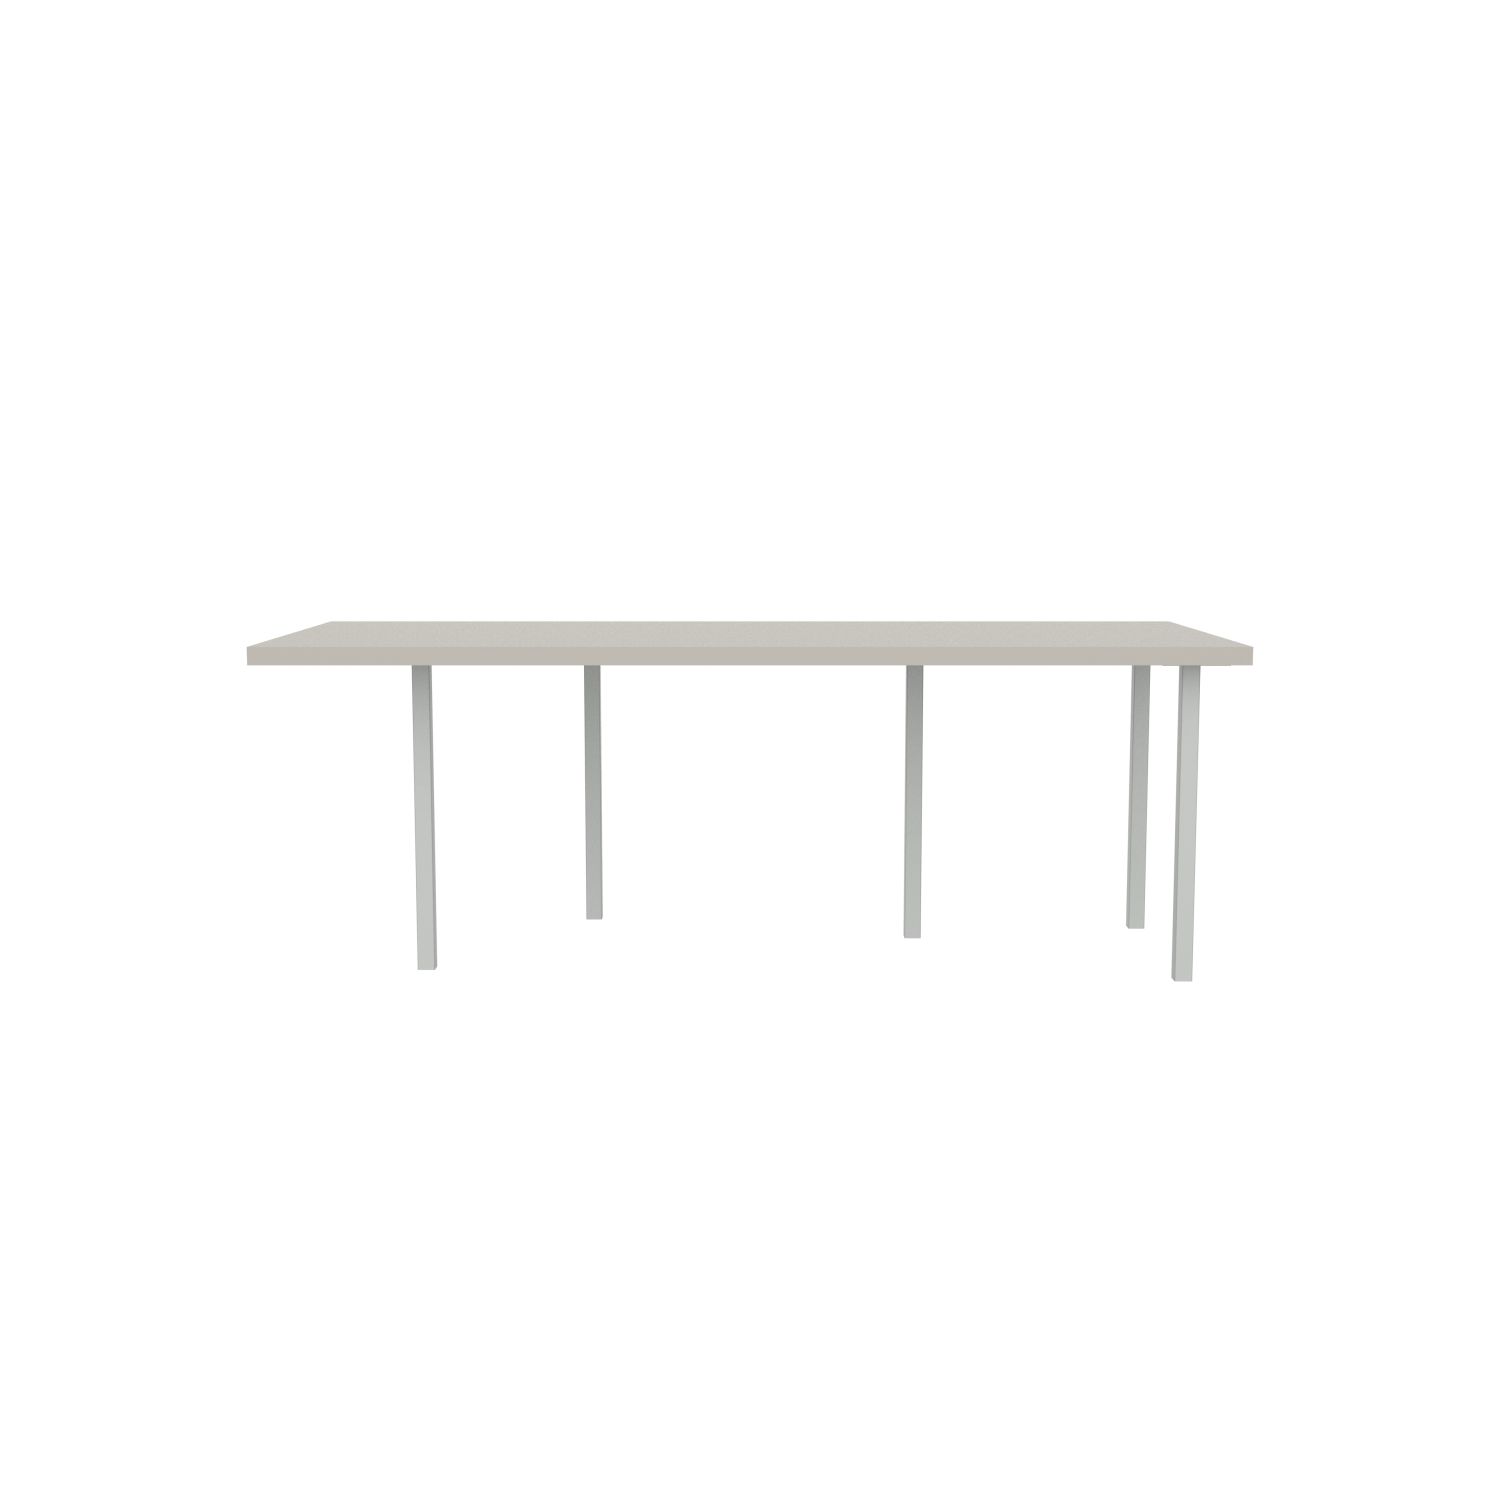 lensvelt bbrand table five fixed heigt 915x218 hpl white 50 mm price level 1 light grey ral7035